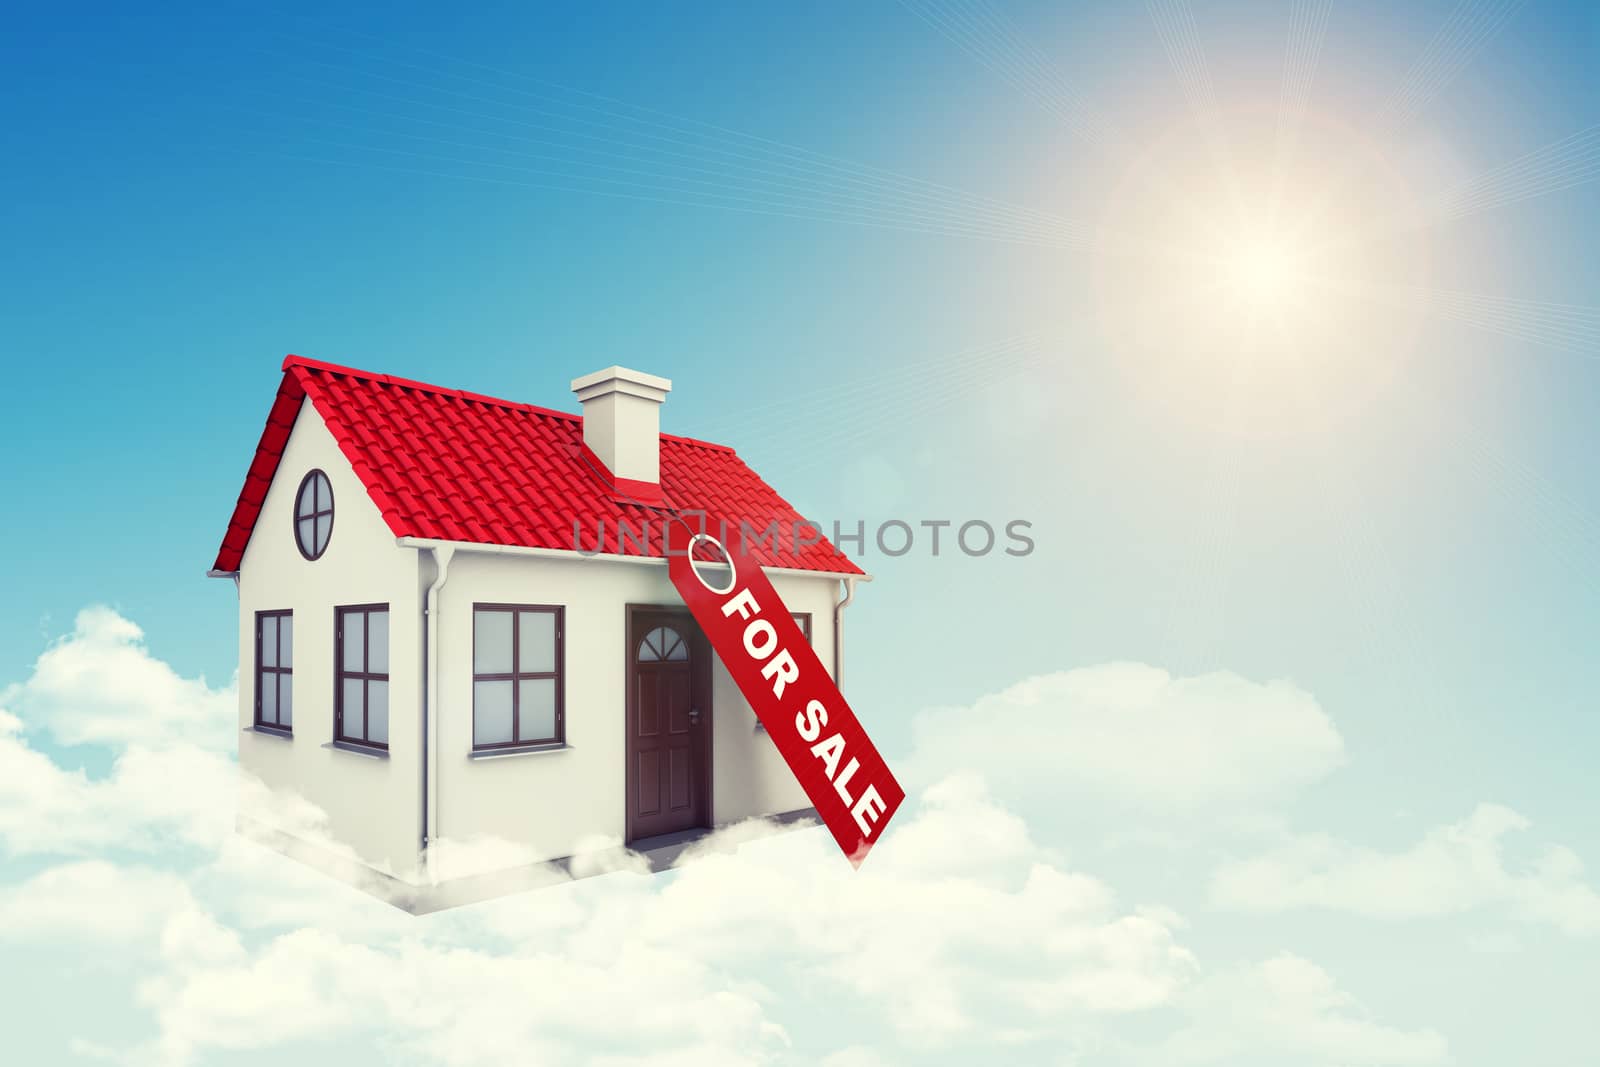 White house with label for sale, red roof, brown door and chimney in cloud. Background sun shines brightly. Blue sky